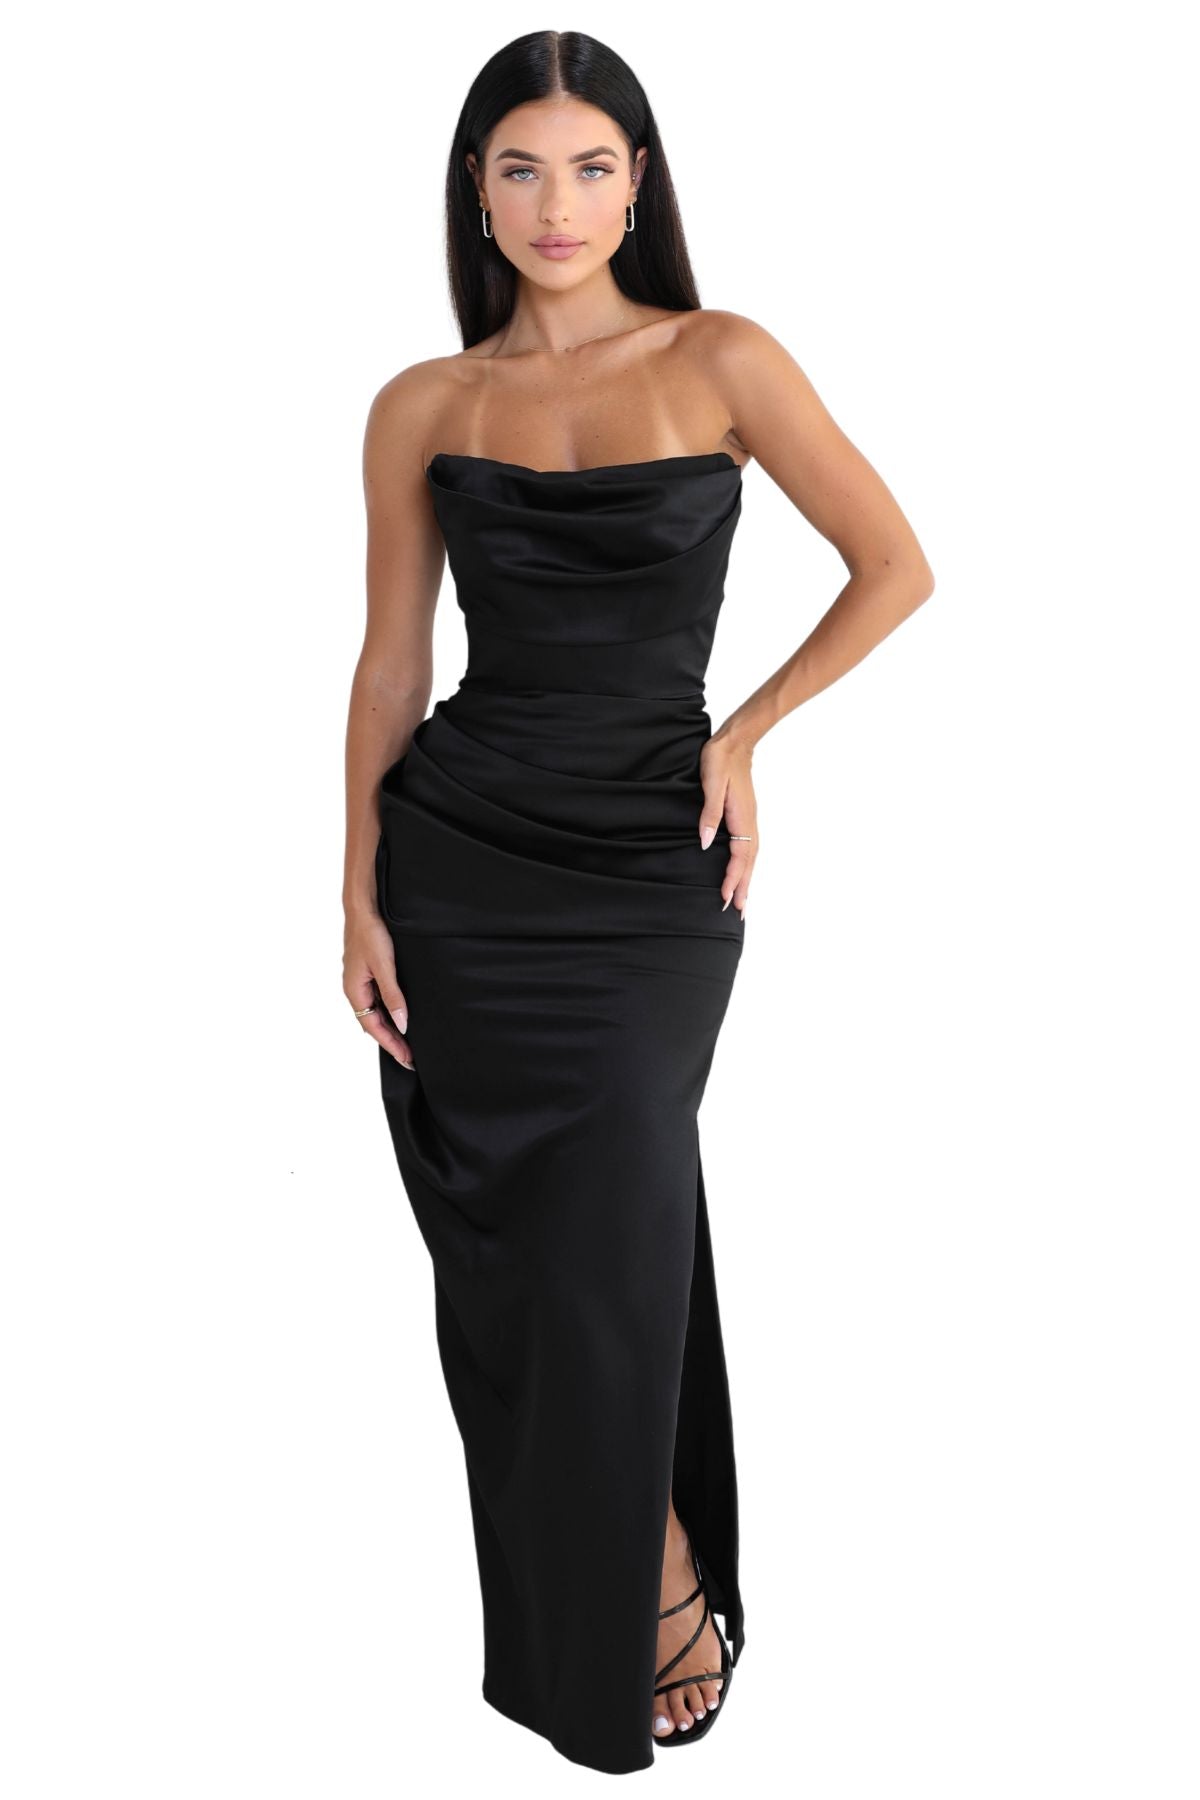 Couture Evening Gowns & Dresses Sydney - Bridesmaid Store